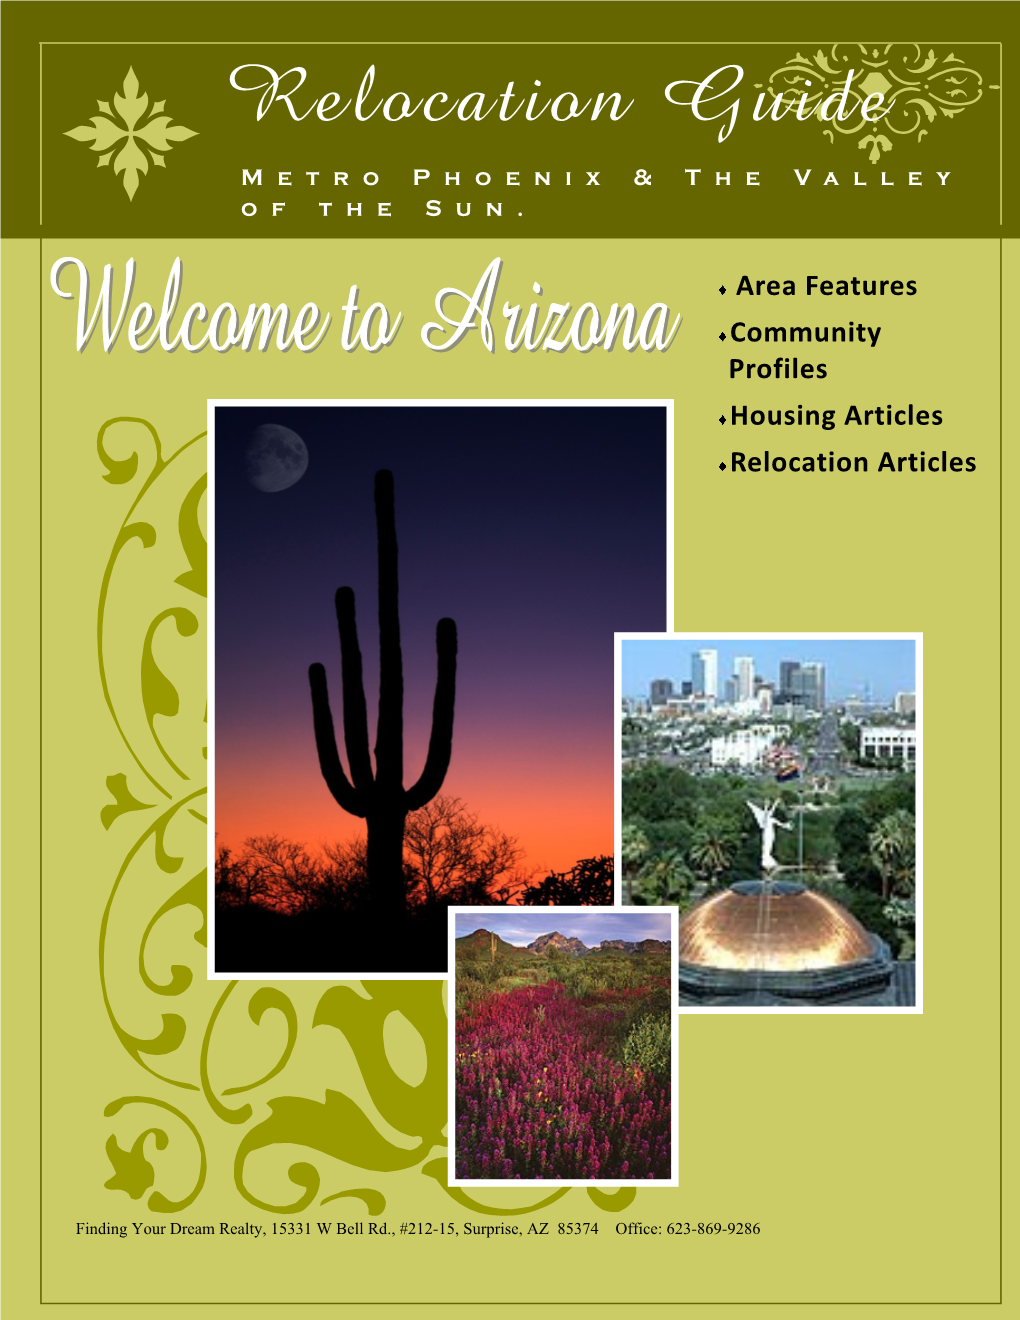 Relocation Guide Metro Phoenix & the Valley of the Sun